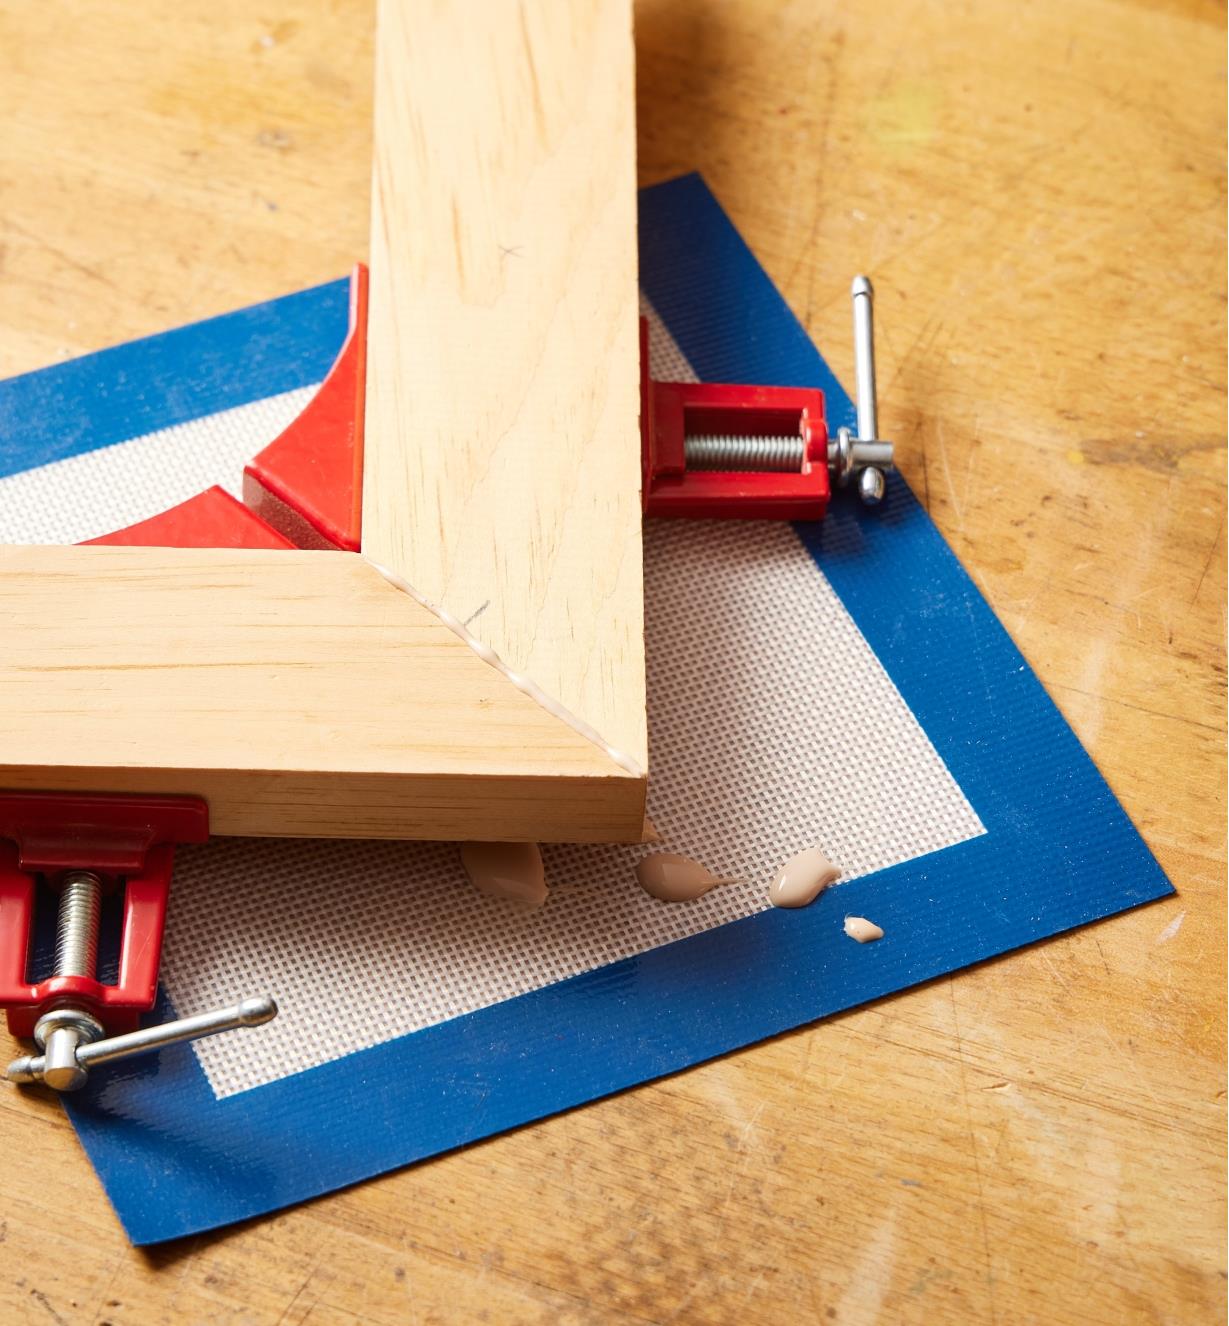 A clamped frame and drops of glue on a silicone mat